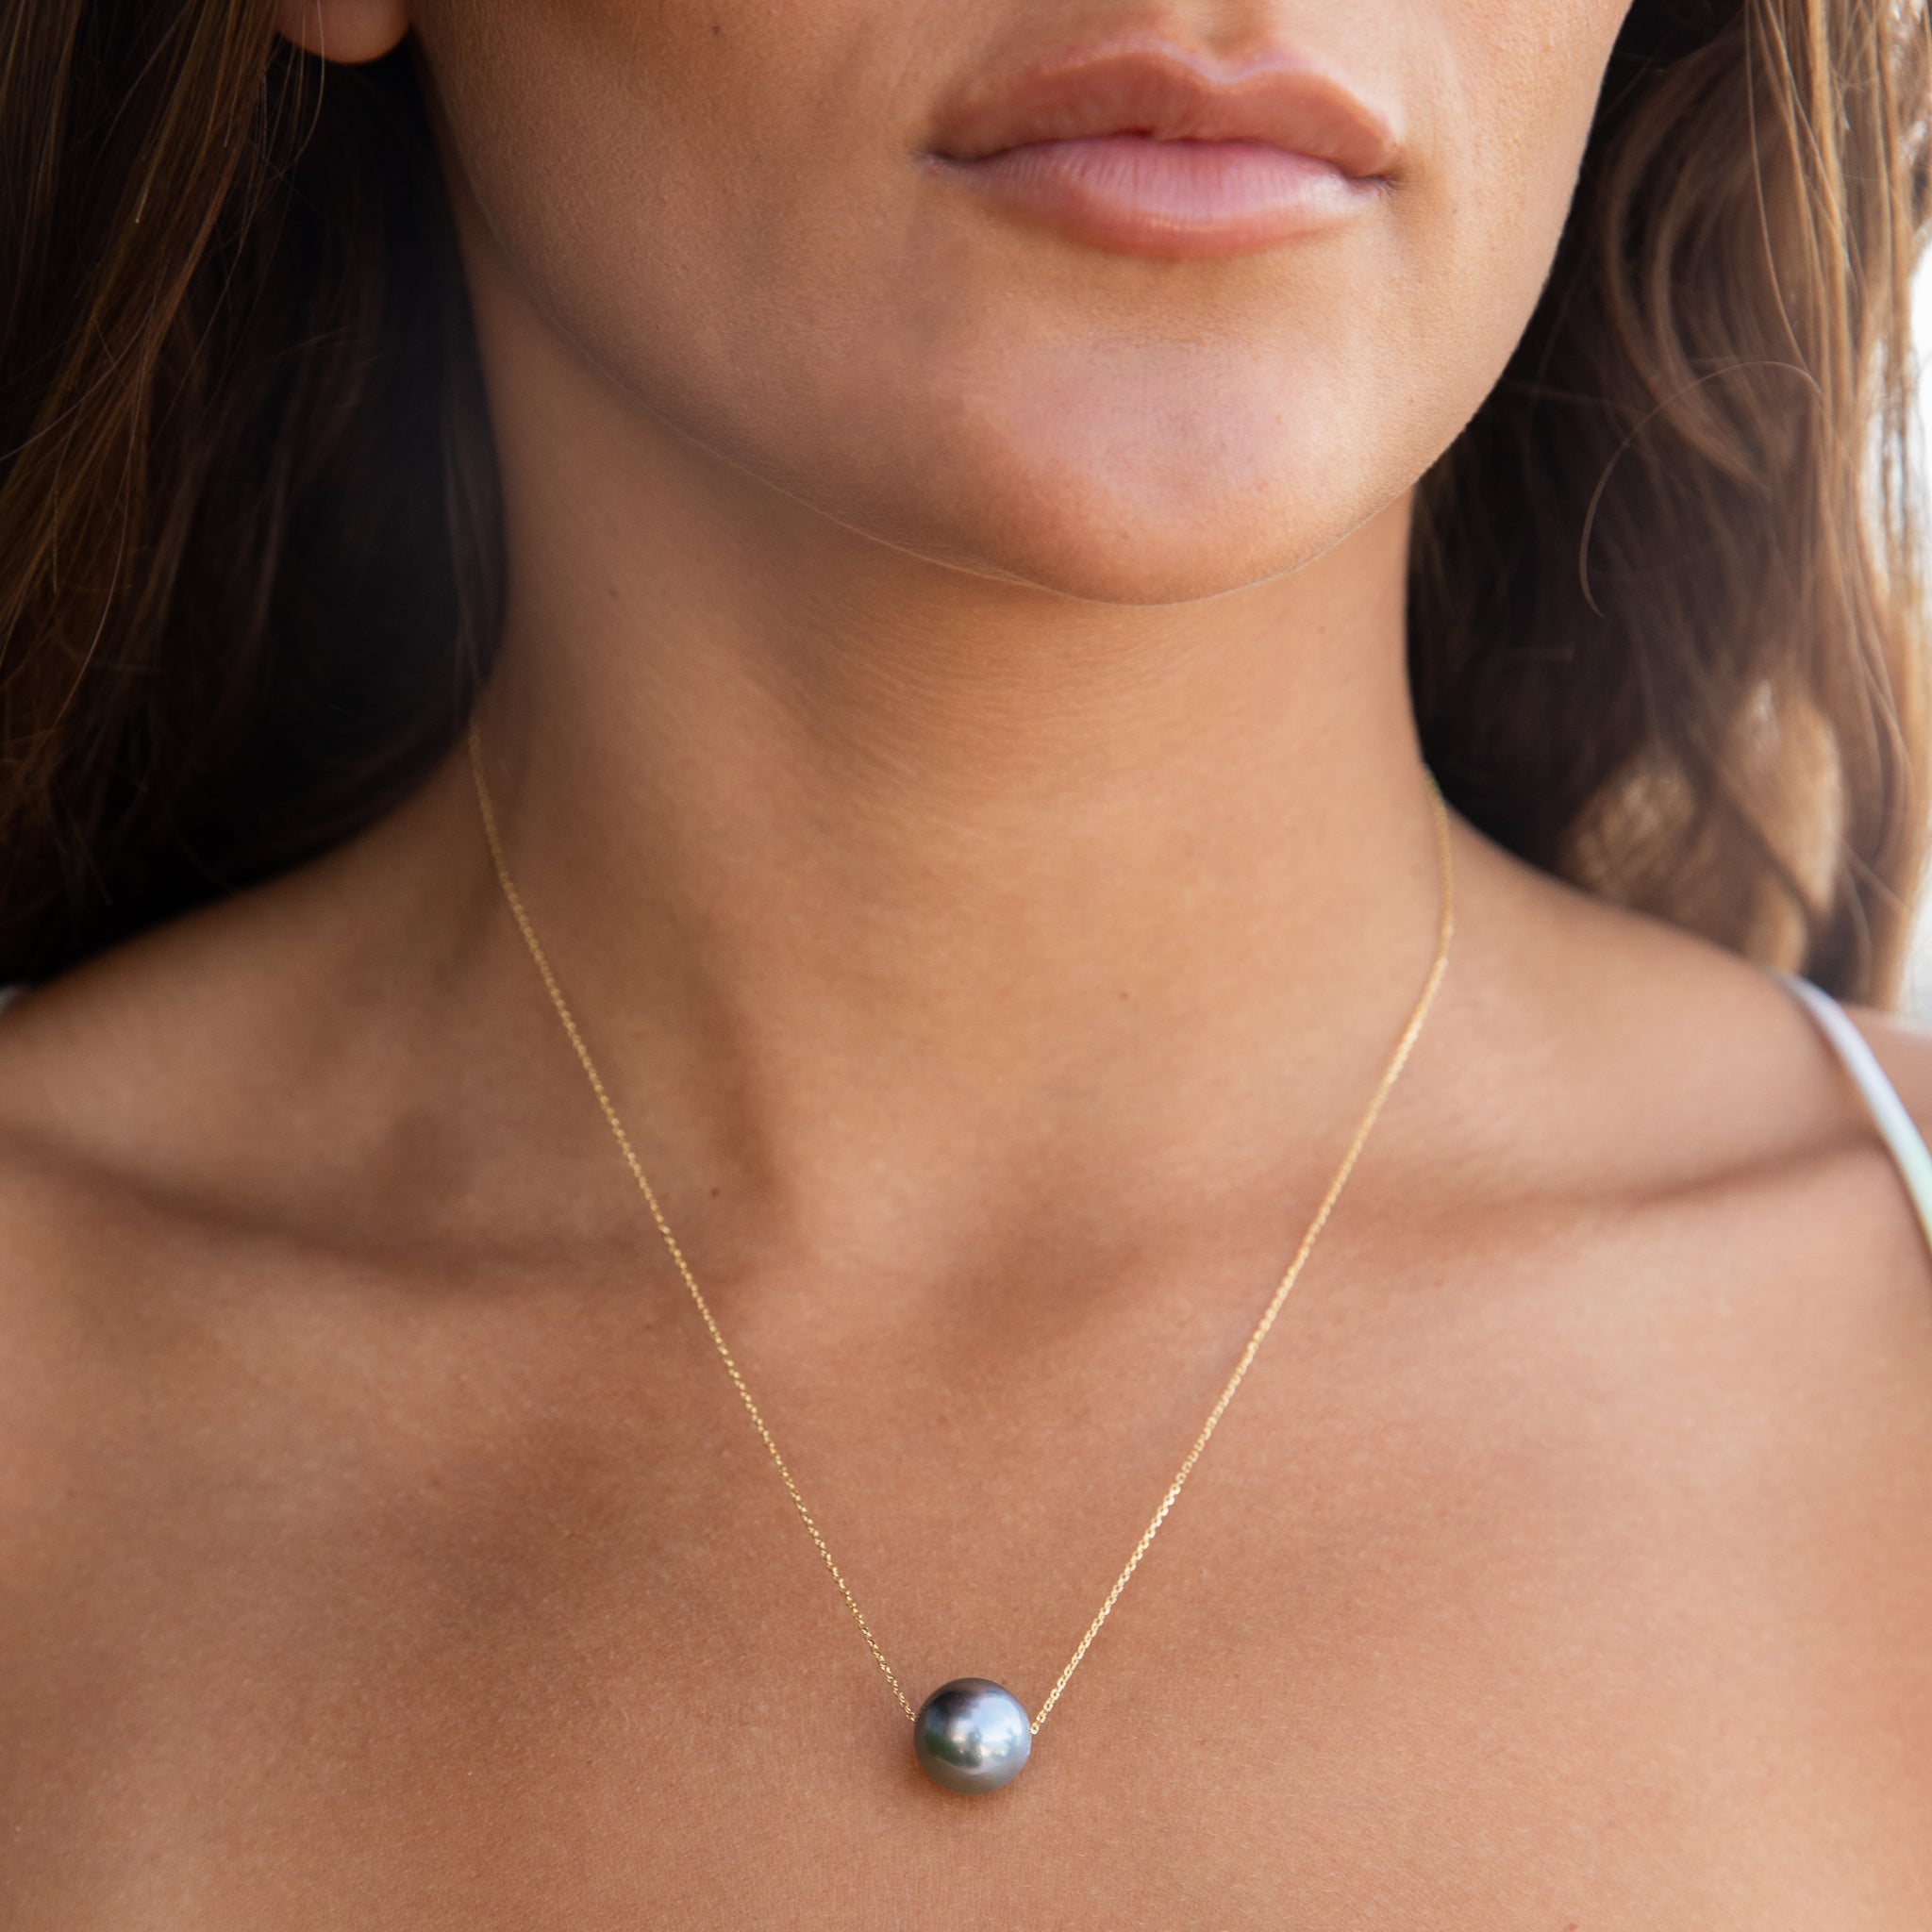 11 Items to Wear With A Tahitian Black Pearl Necklace - PearlsOnly